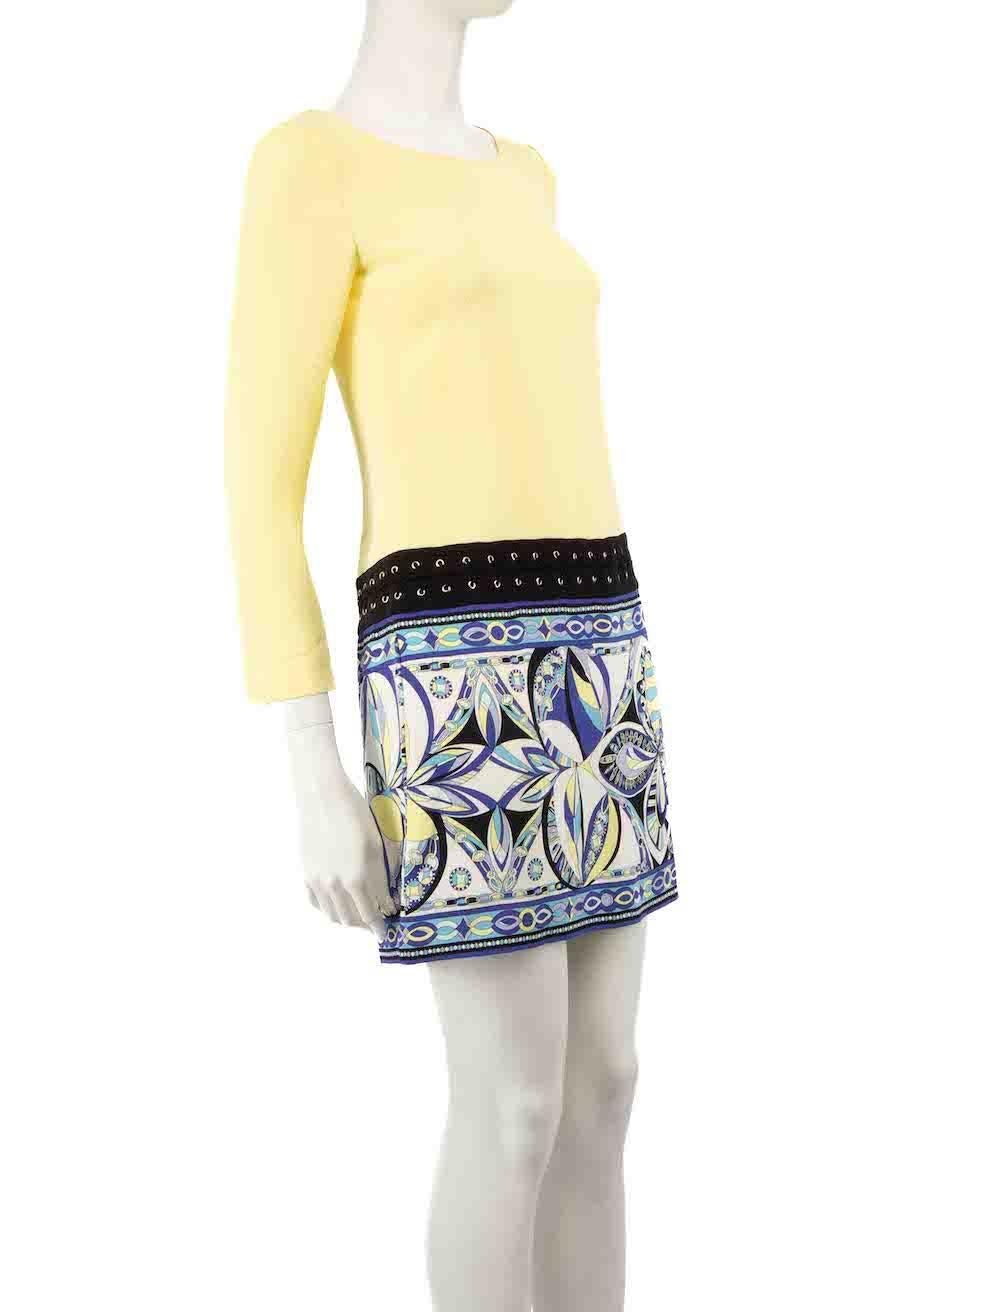 CONDITION is Very good. Minimal wear to dress is evident. Minimal wear to the fabric surface with one or two very small, light discoloured marks at the centre front near the waistband on this used Emilio Pucci designer resale item.
 
 
 
 Details
 
